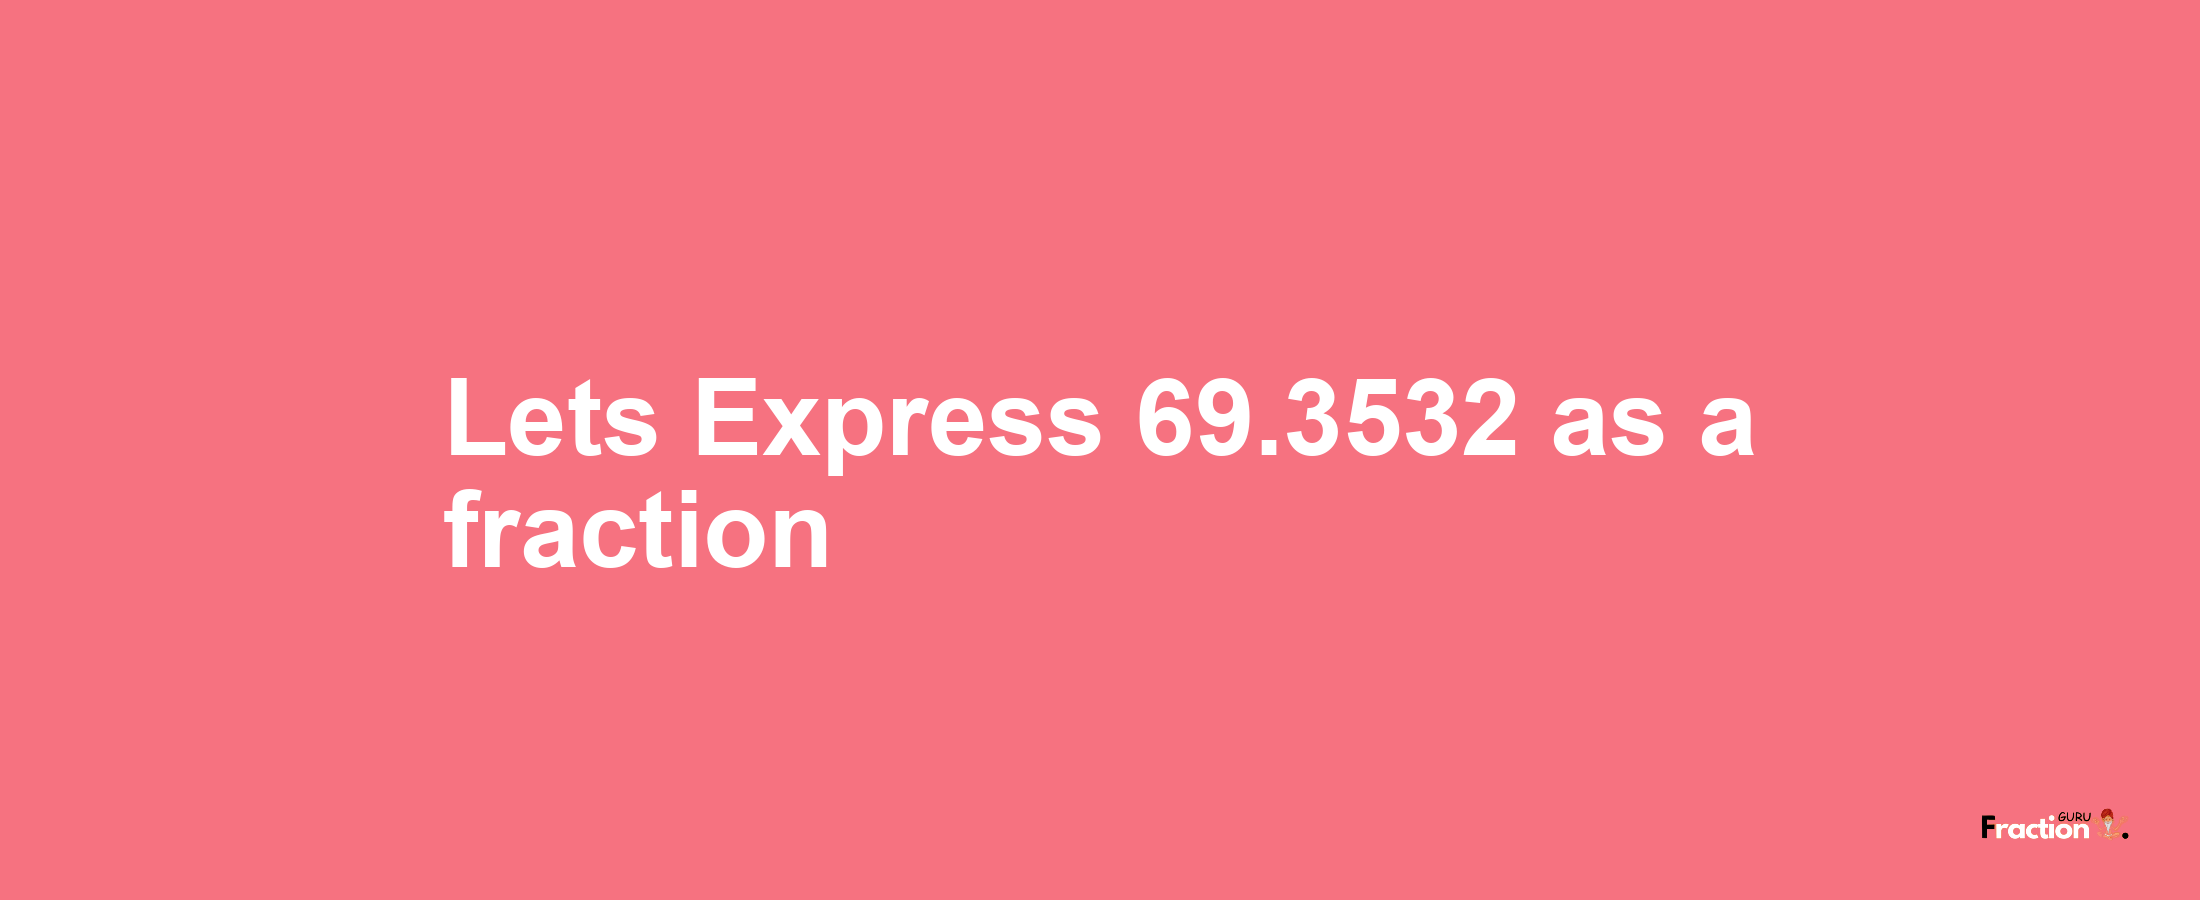 Lets Express 69.3532 as afraction